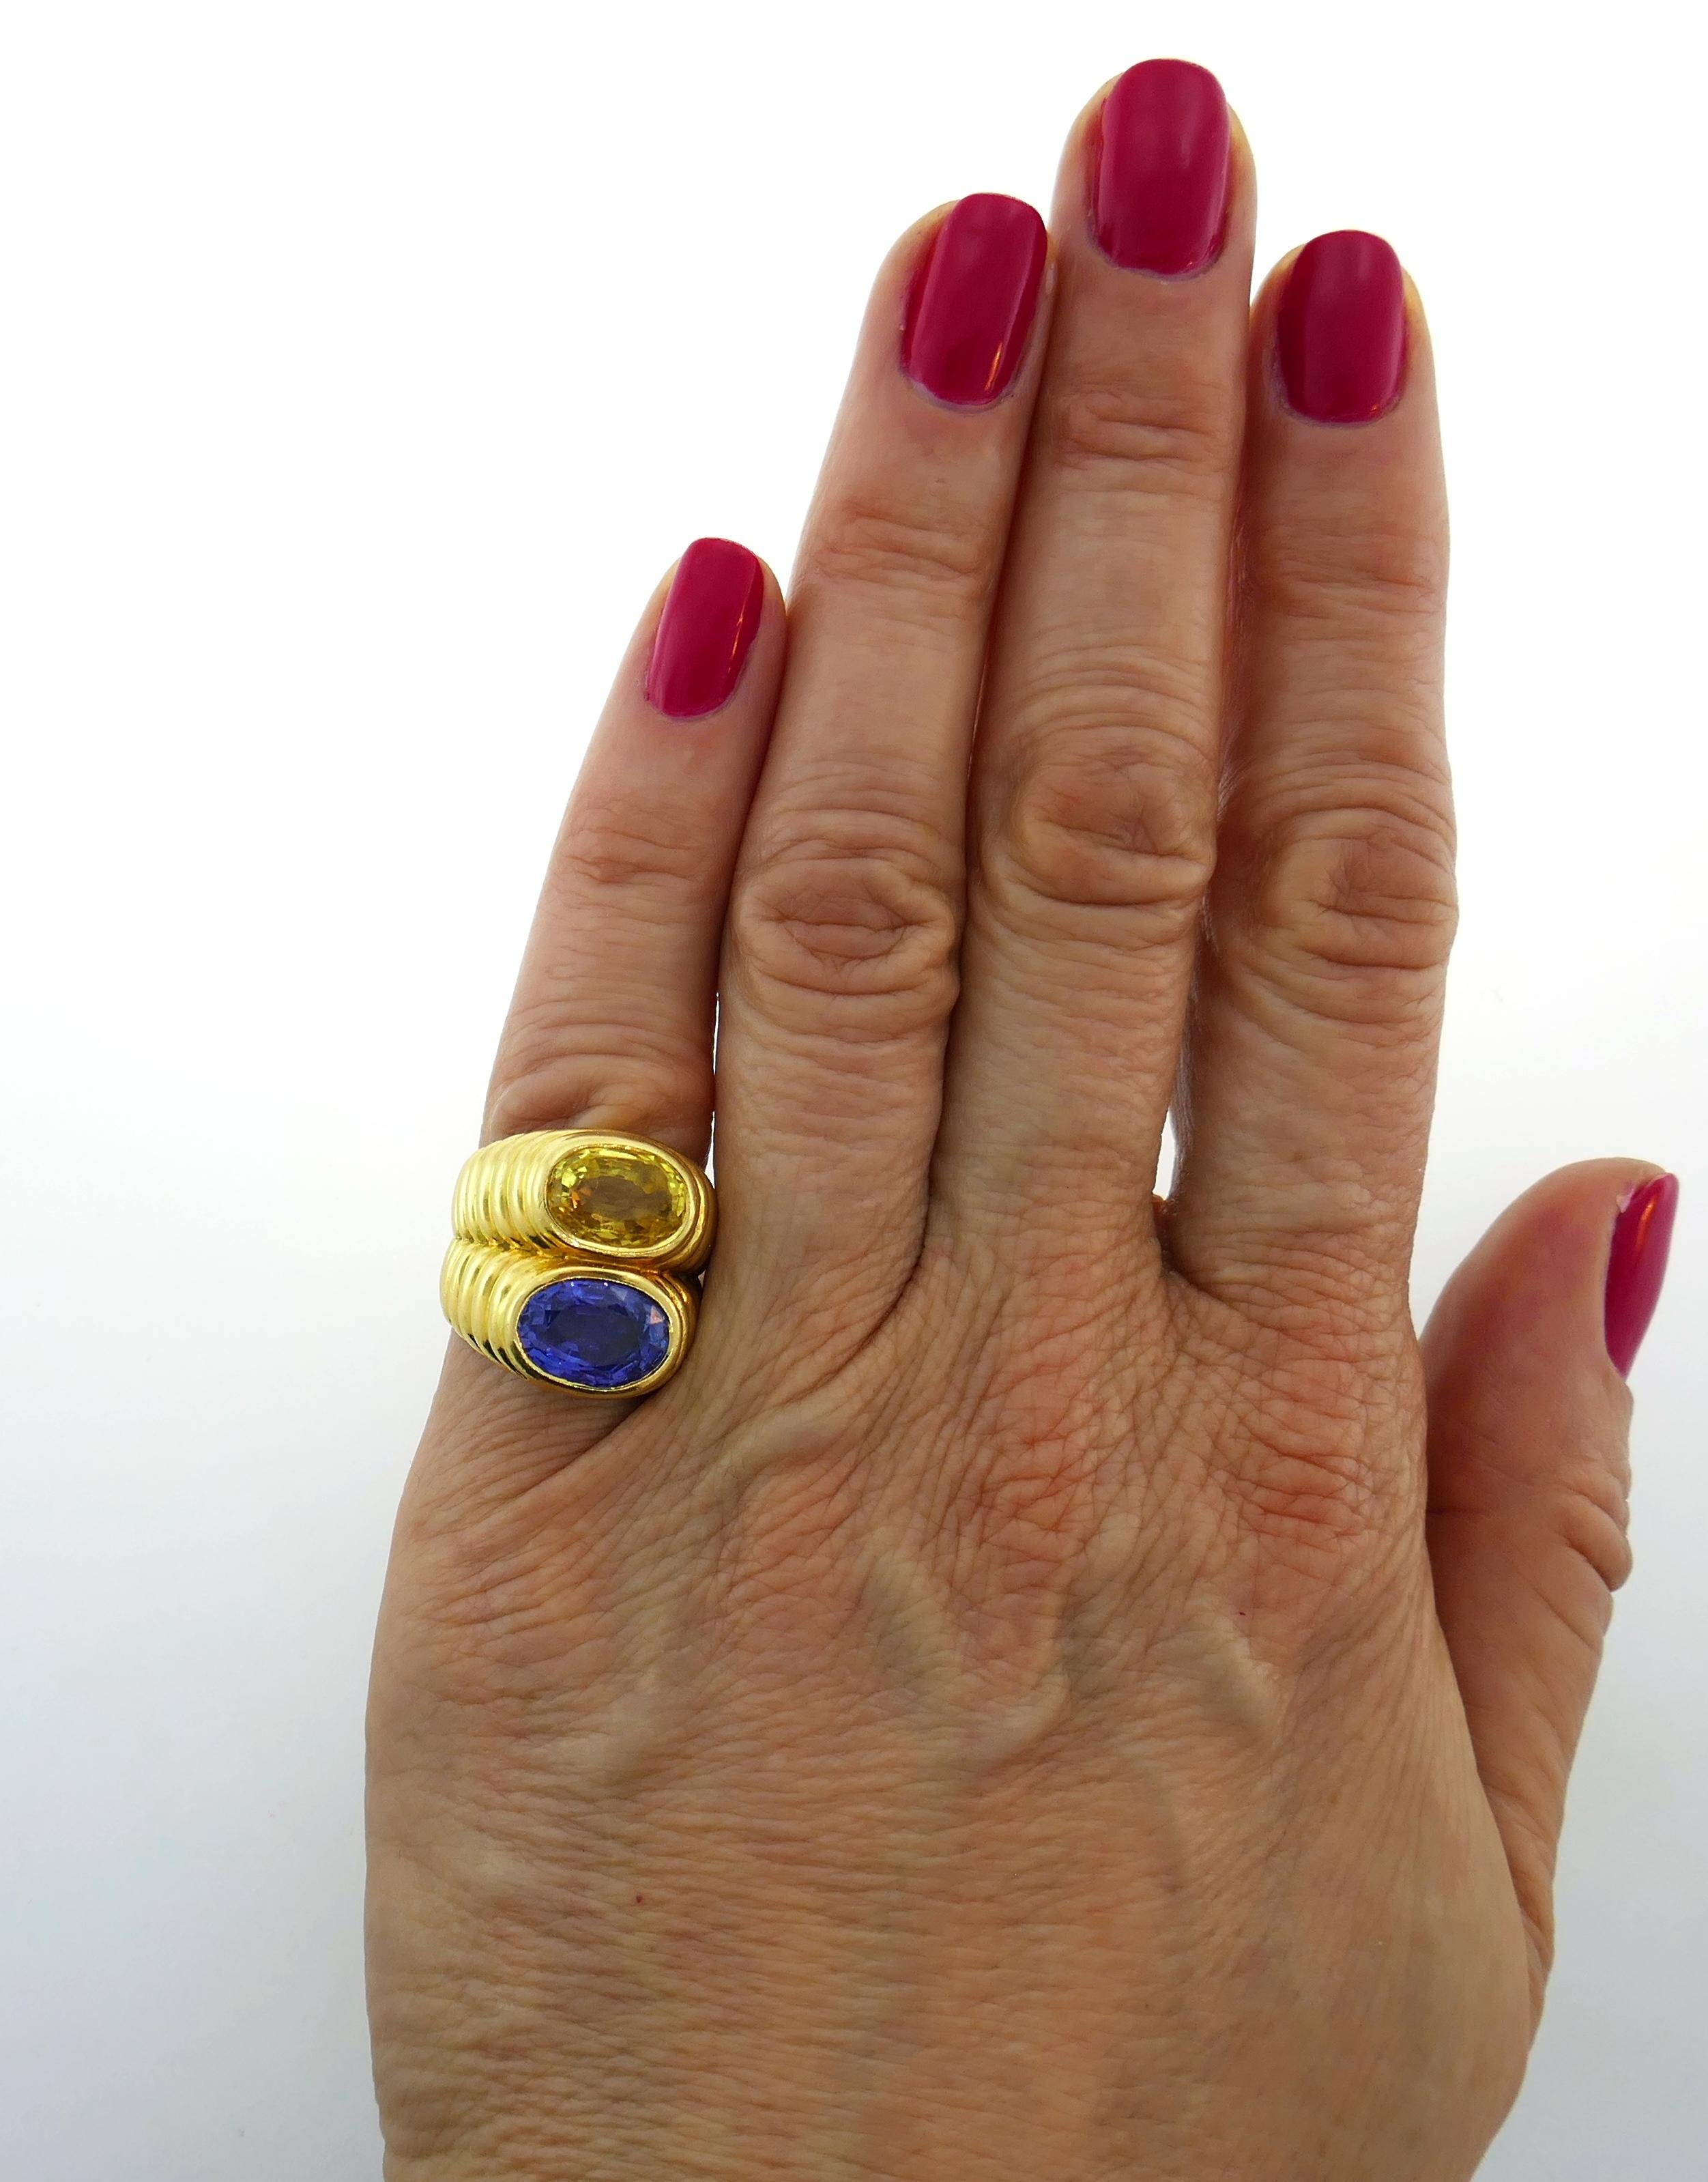 Beautiful Doppio ring created by Bulgari in Italy in the 1980s. Features a 4.68-carat oval faceted blue sapphire and a 4.68-carat oval faceted yellow sapphire set in 18 karat yellow gold. Timeless, classy and wearable, the ring is a great addition